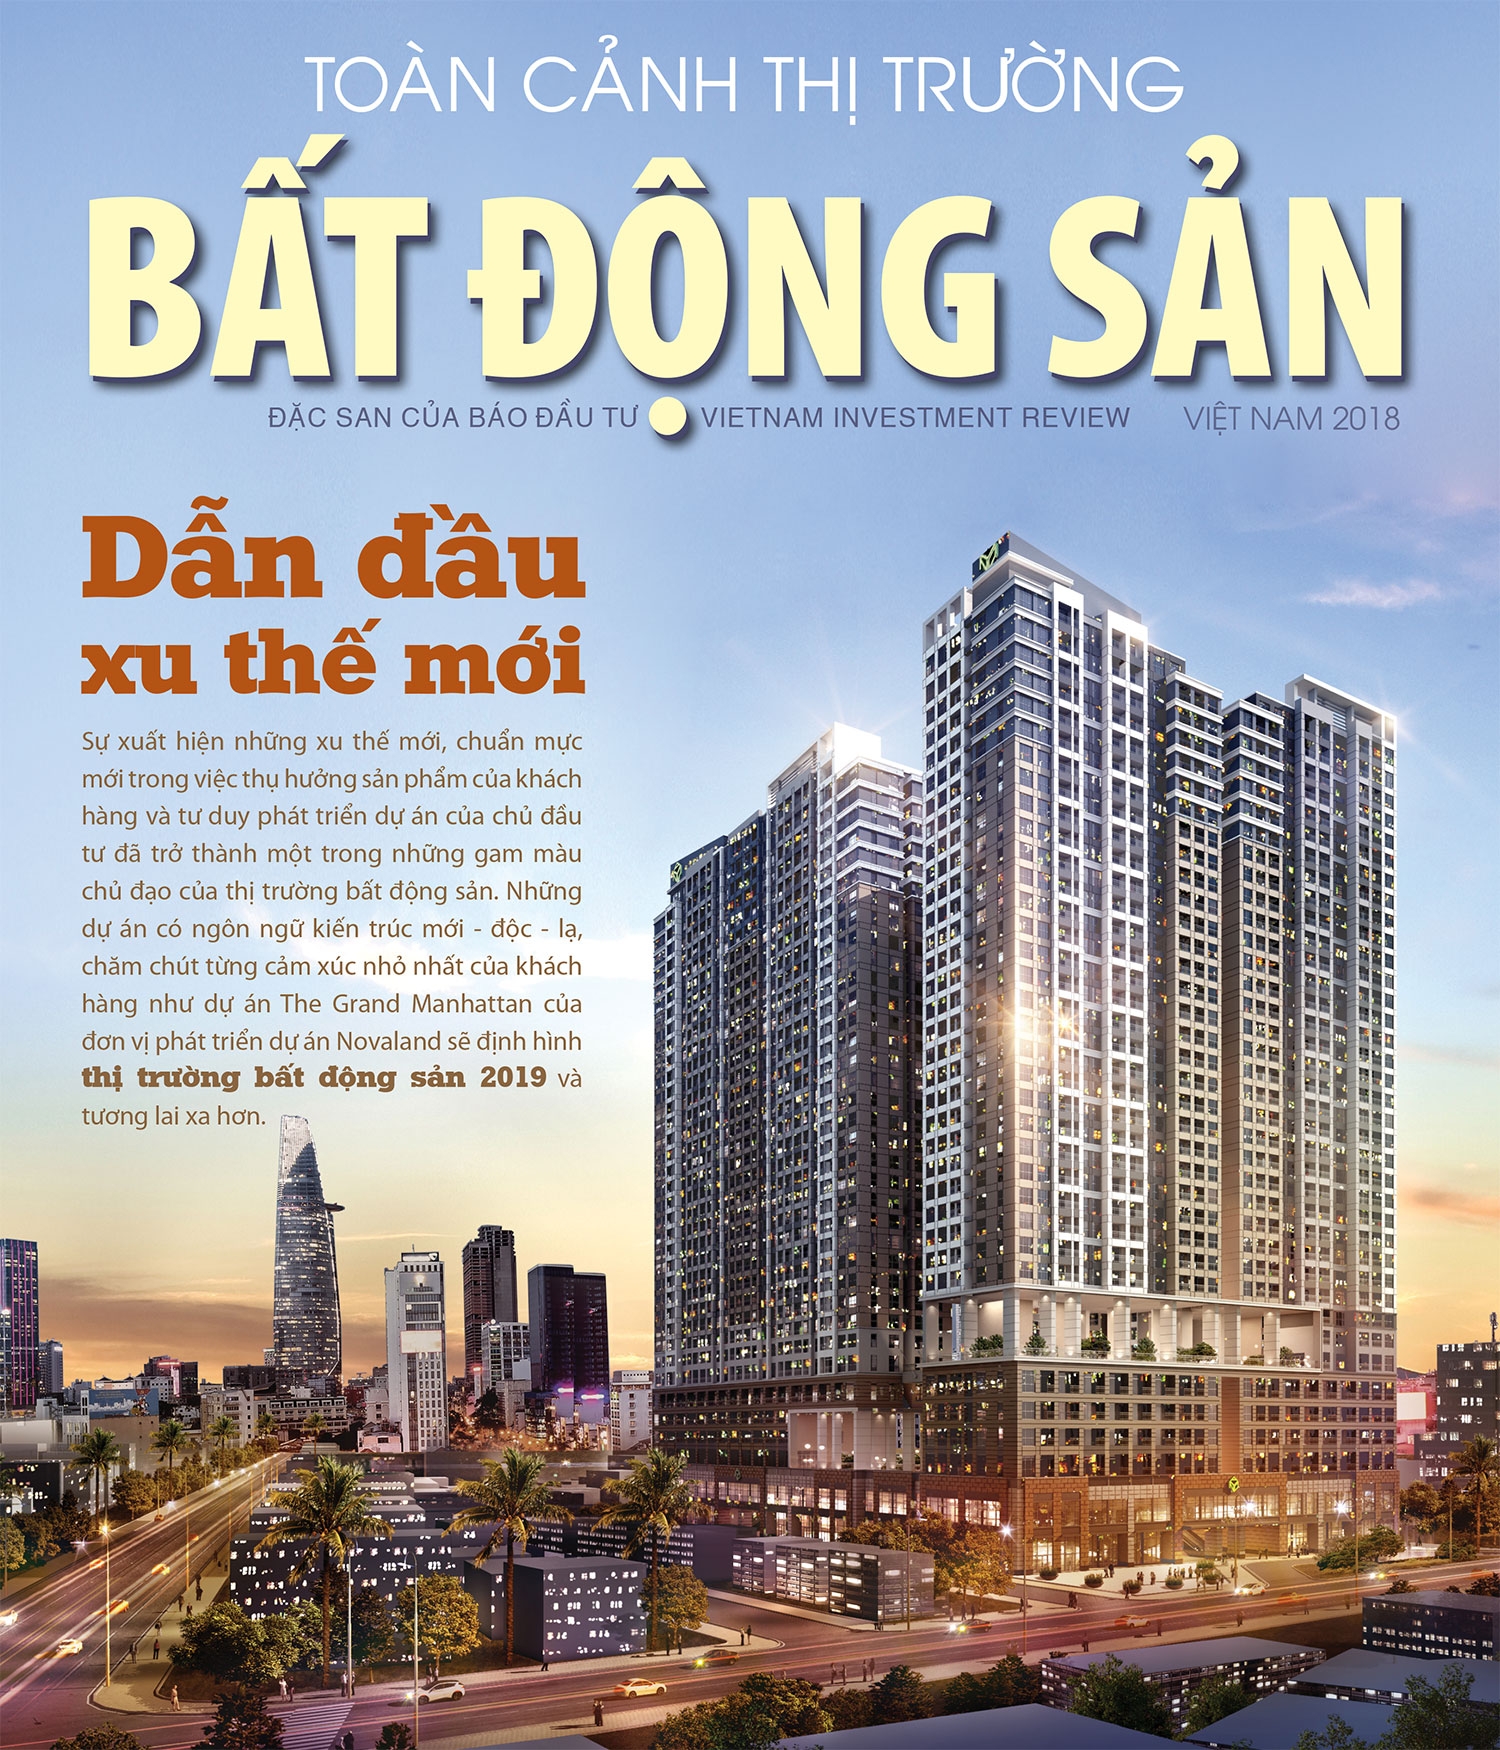 Vietnam Property Outlook 2018 unveils latest real estate trends